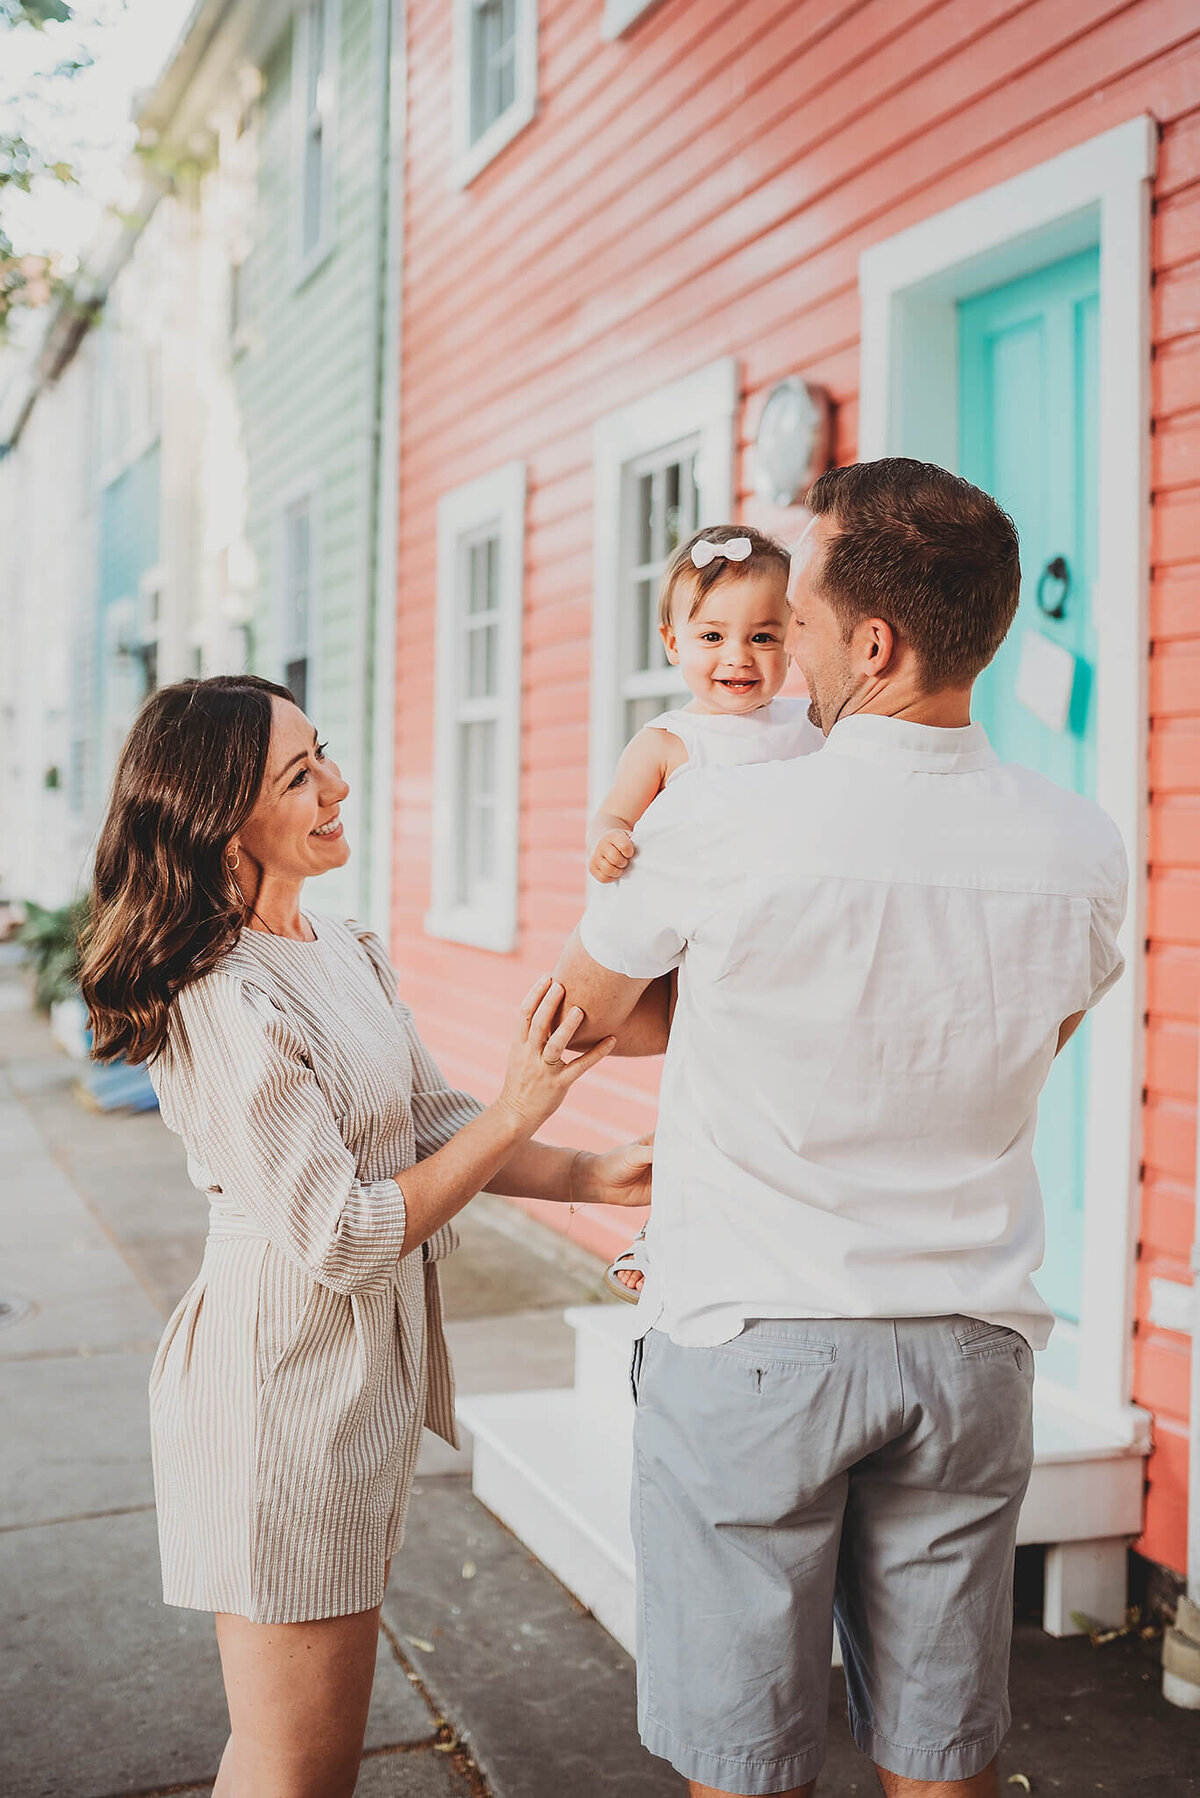 Woman and Man smiling and playing with baby in front of colorful houses in Fells Point Baltimore Maryland